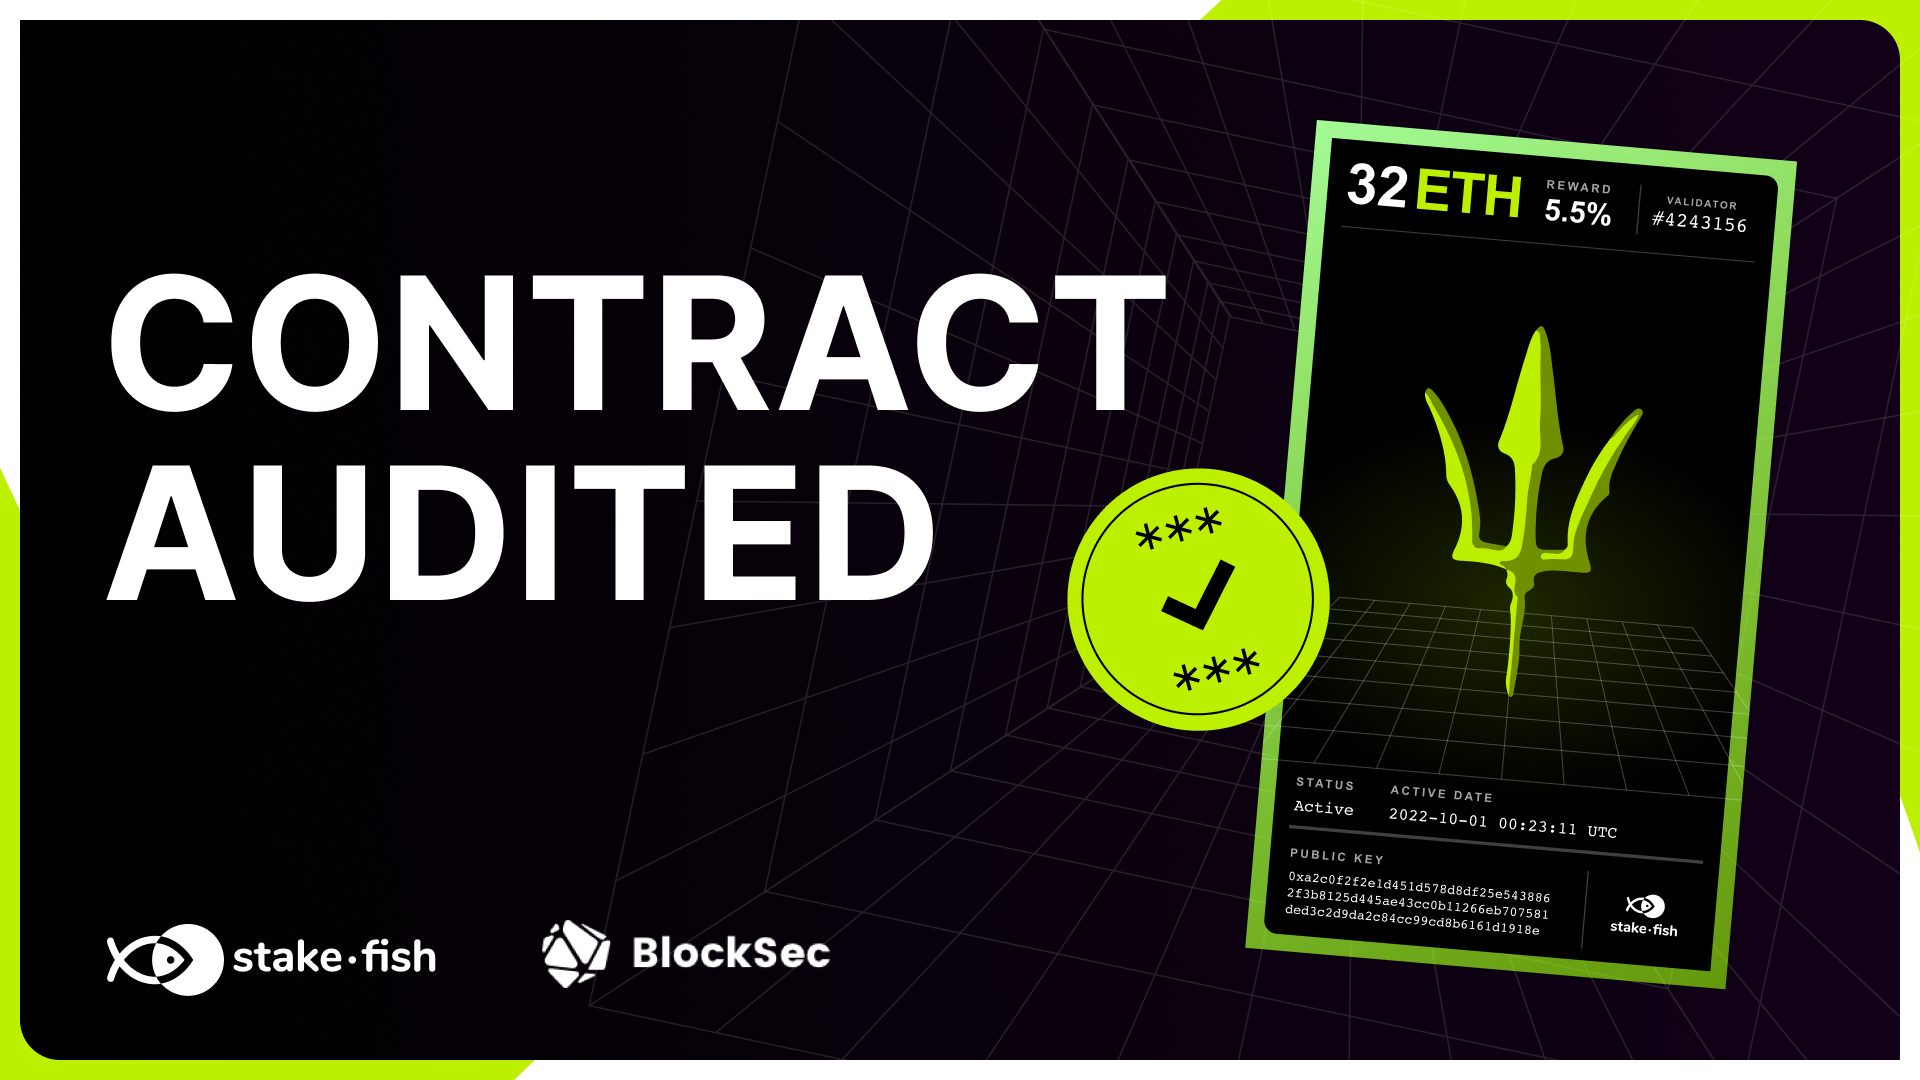 stakefish contract audited by BlockSec